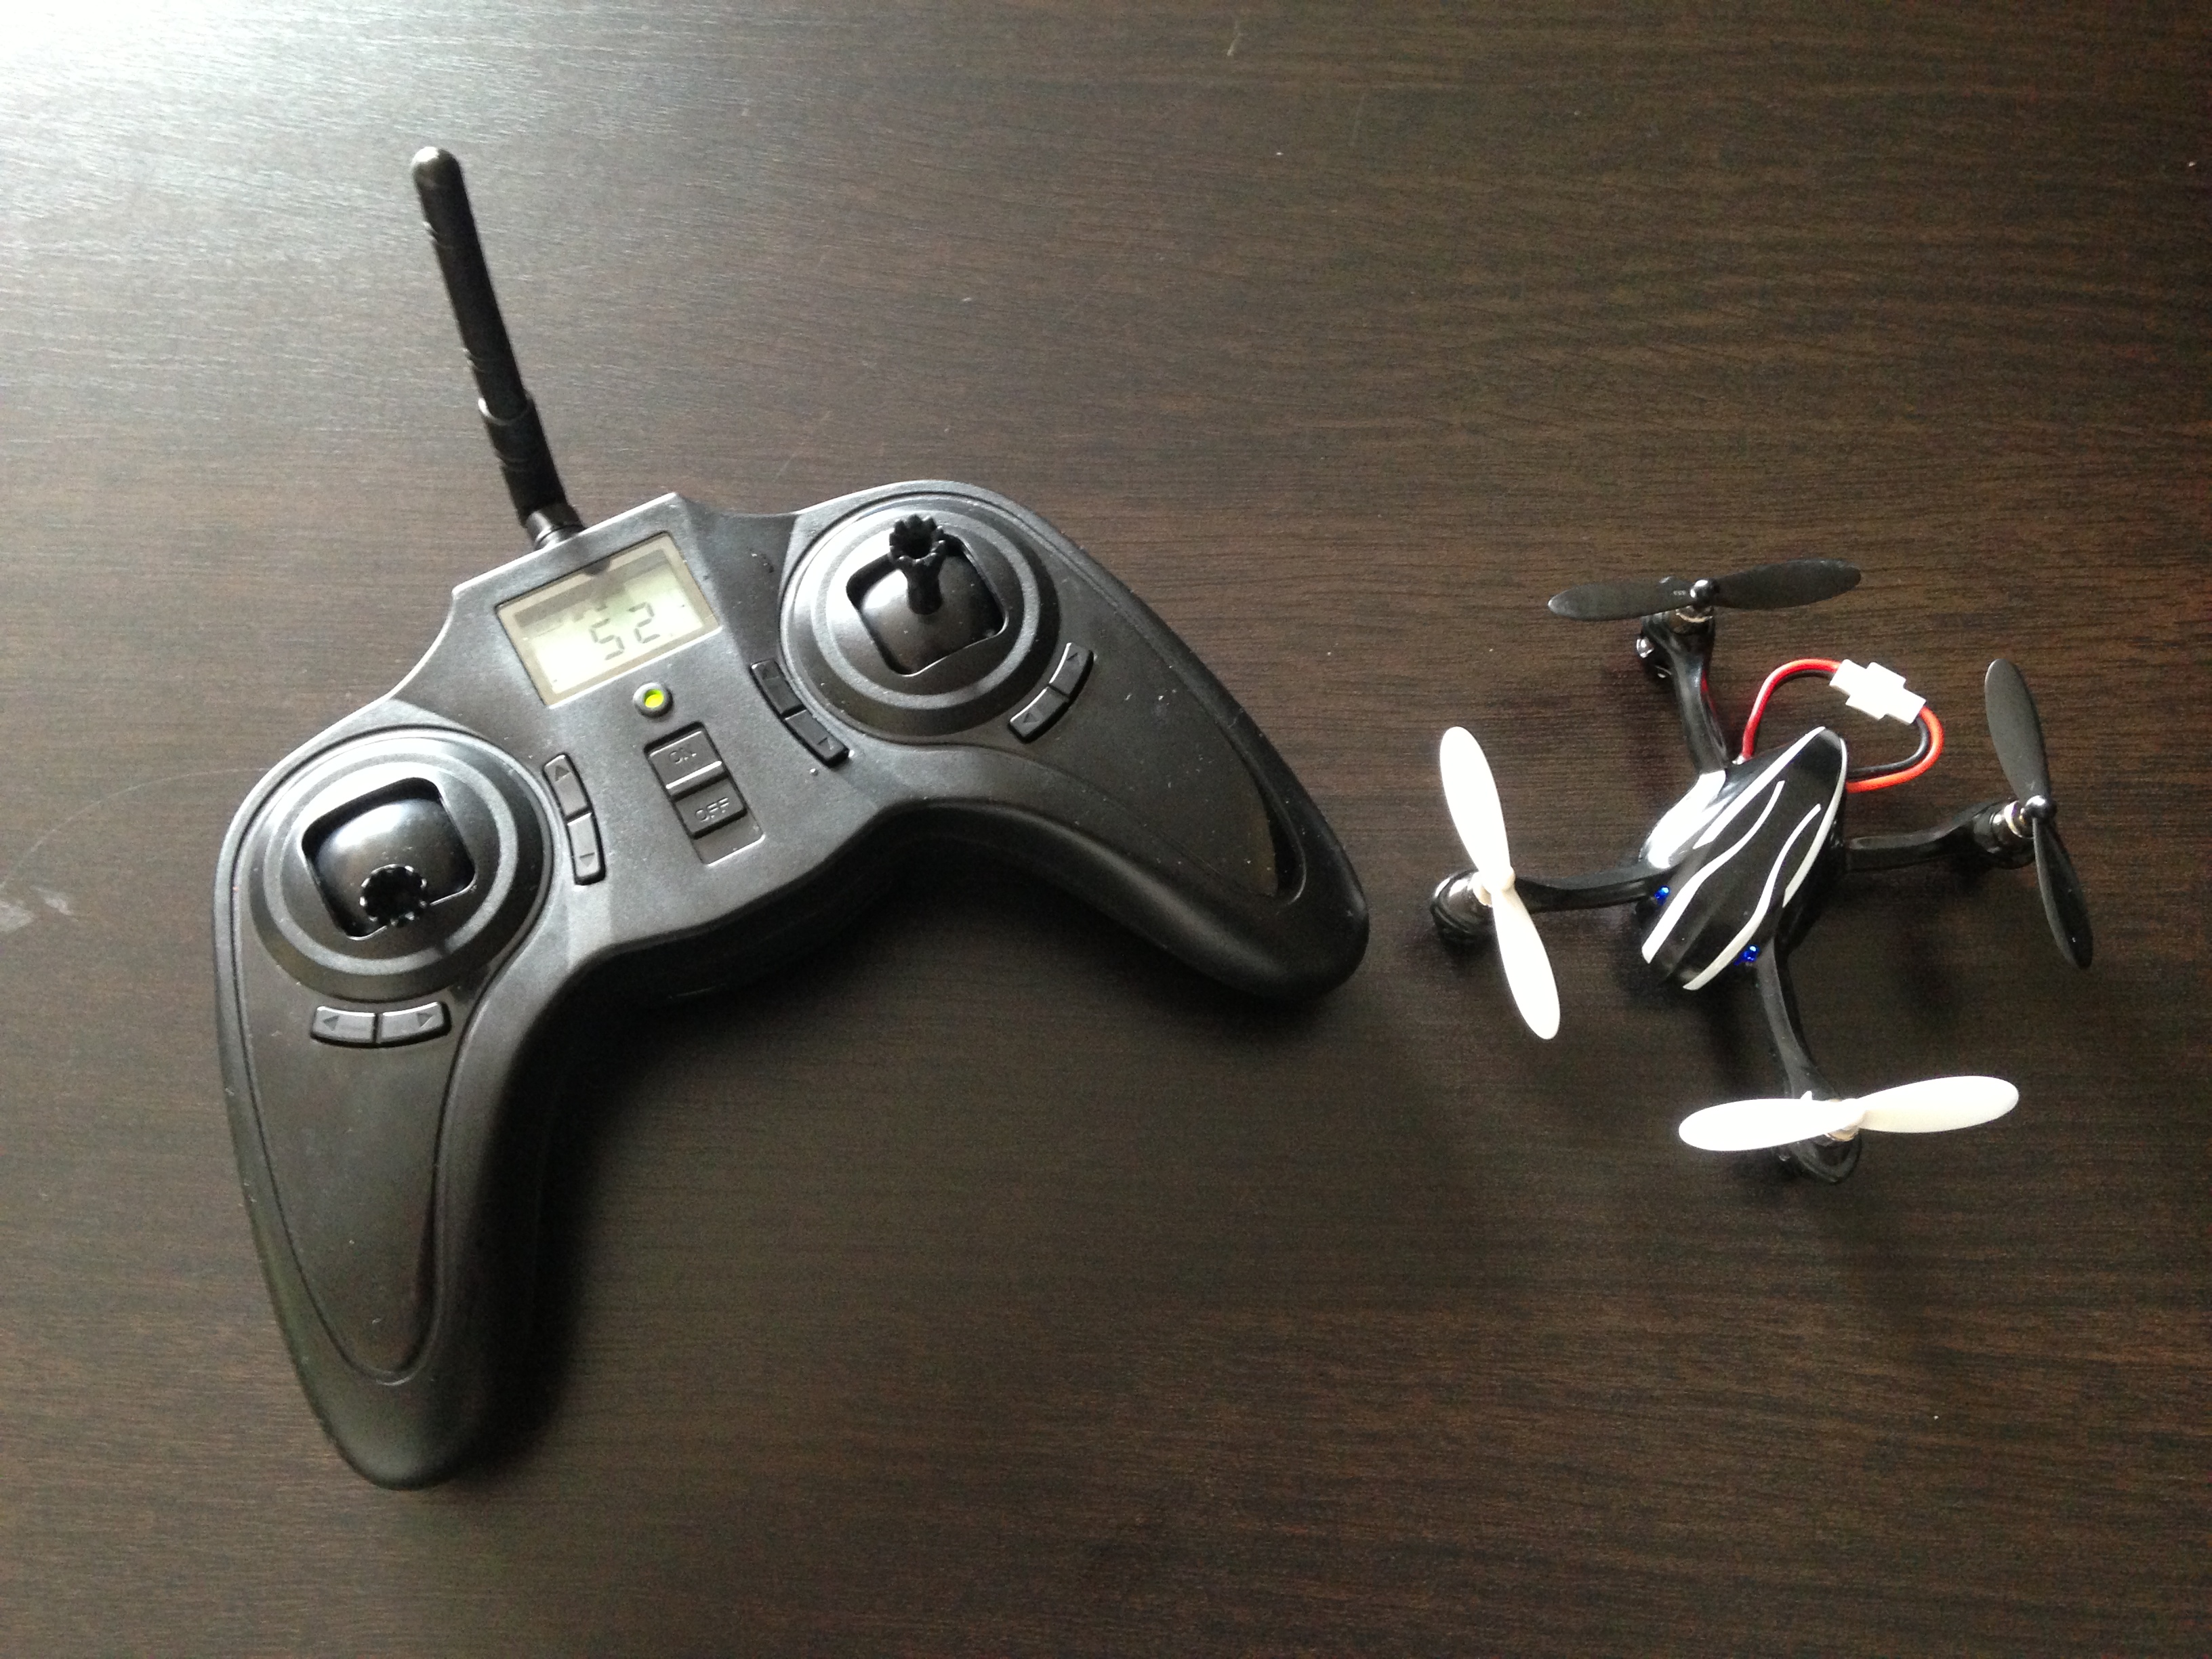 Hubsan X4 Quadcopter Review